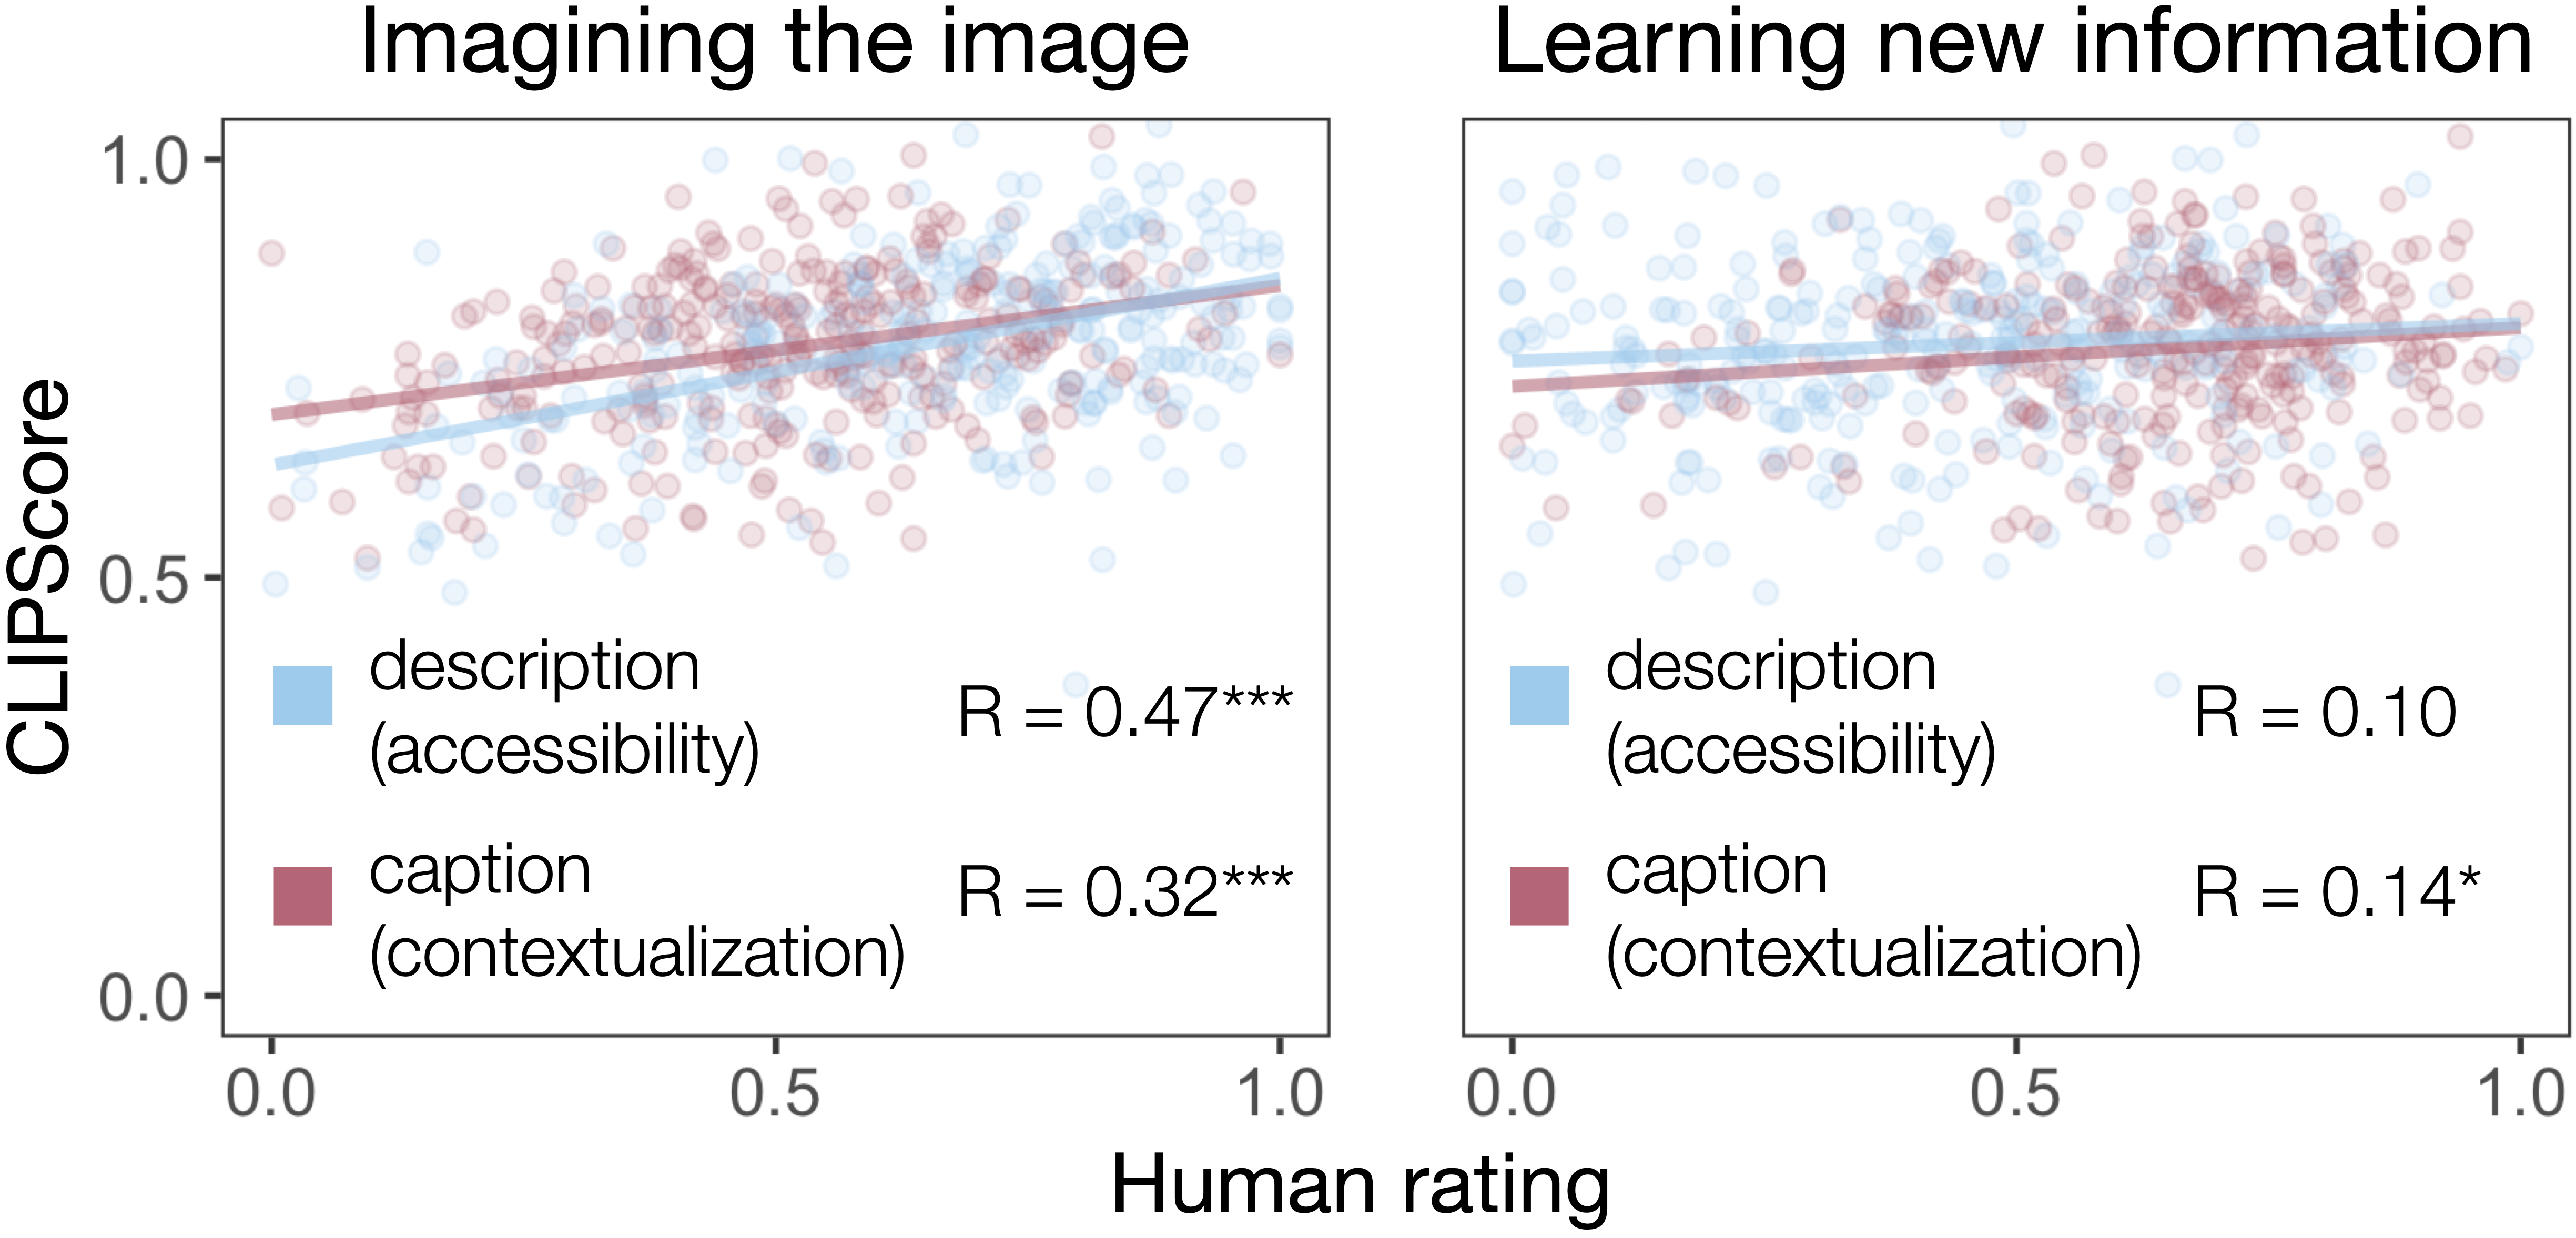 2 subplots with the titles 'imagining the image' and 'learning new information'. The graph shows significant positive correlations in the 'imagining the image' plot for both descriptions (R=0.47) and captions (R=0.32). The correlation is much smaller for 'learning new information', not significant for descriptions (R=0.10) and significant for captions (R=0.14).